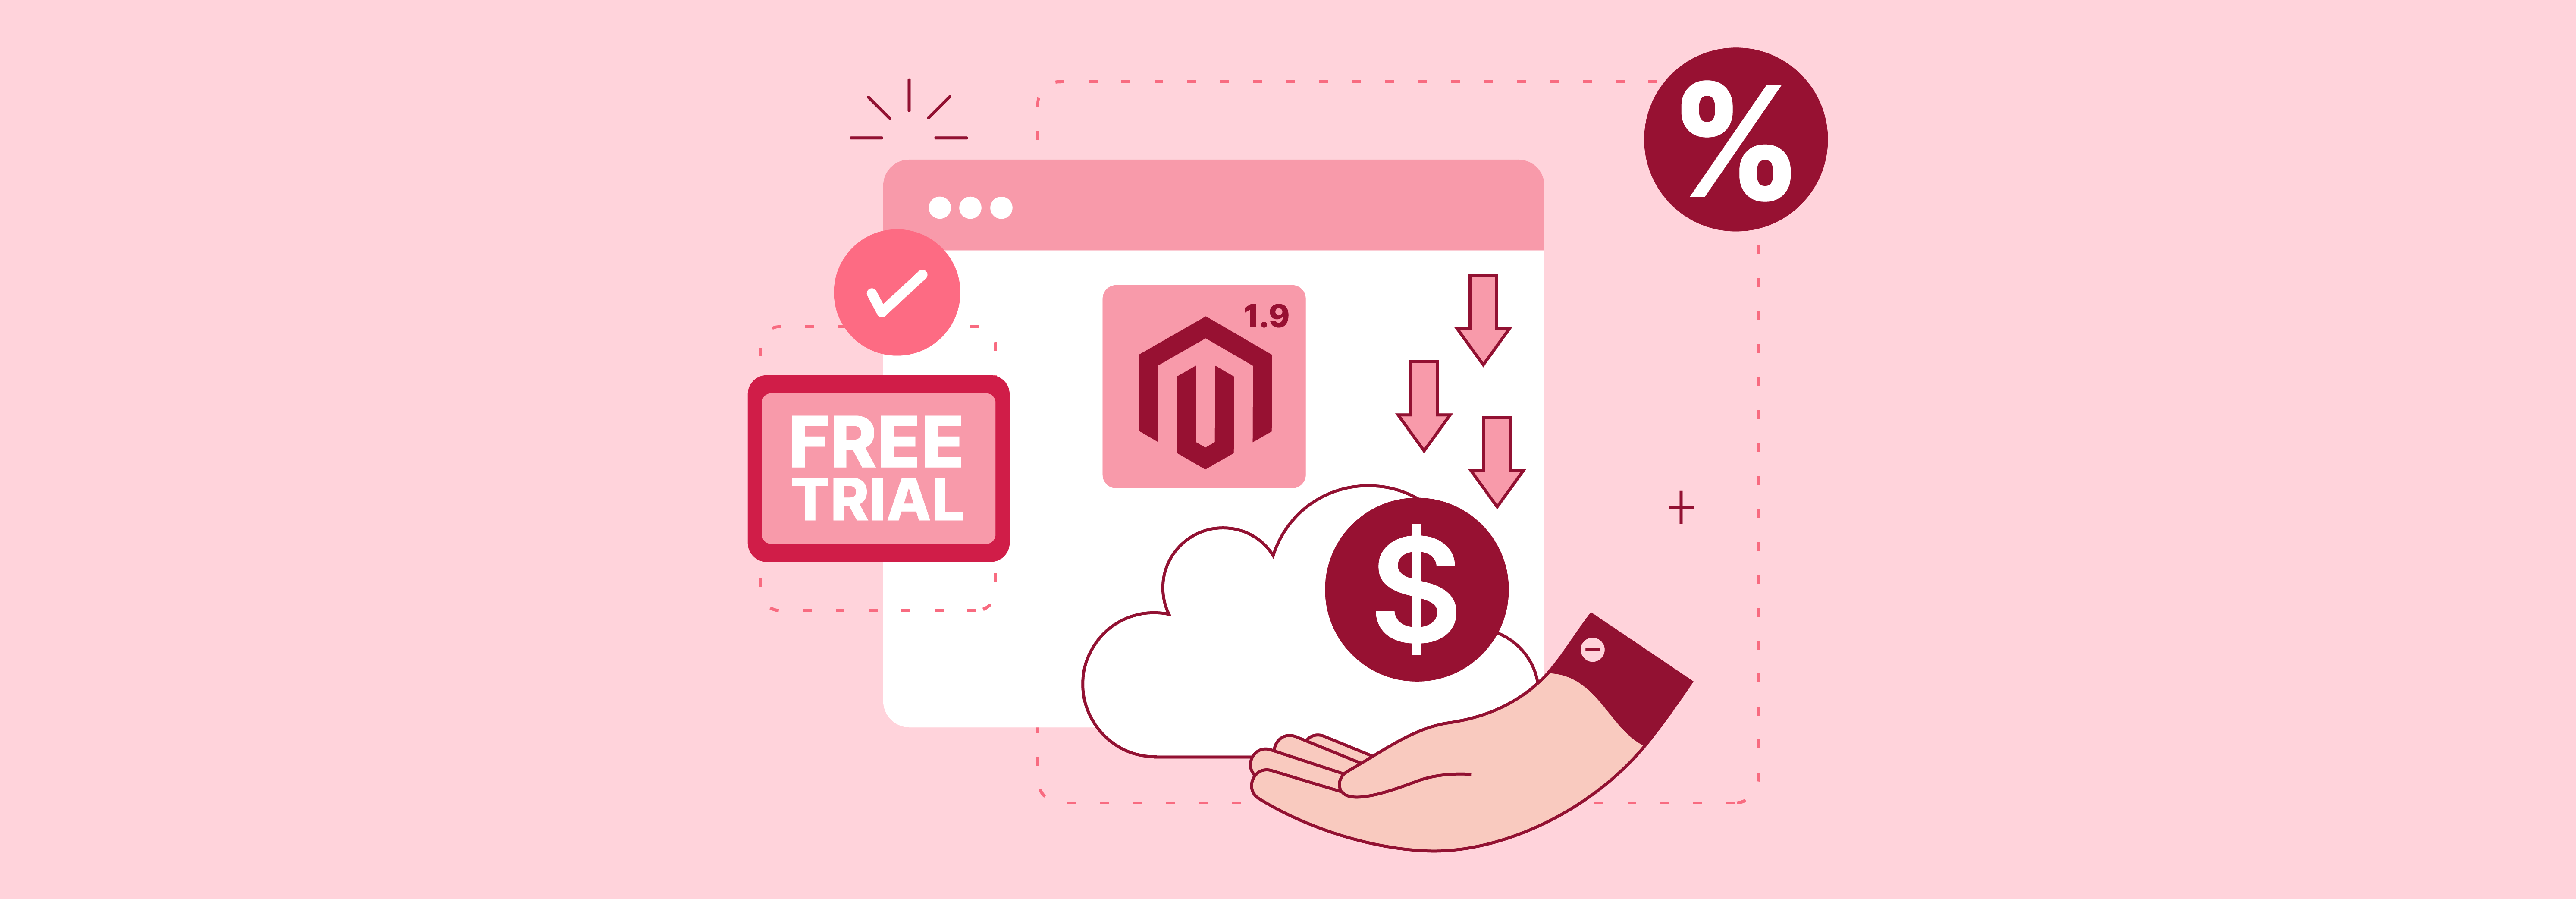 Securing Best Prices for Magento 1.9 Cloud Hosting with Discounts